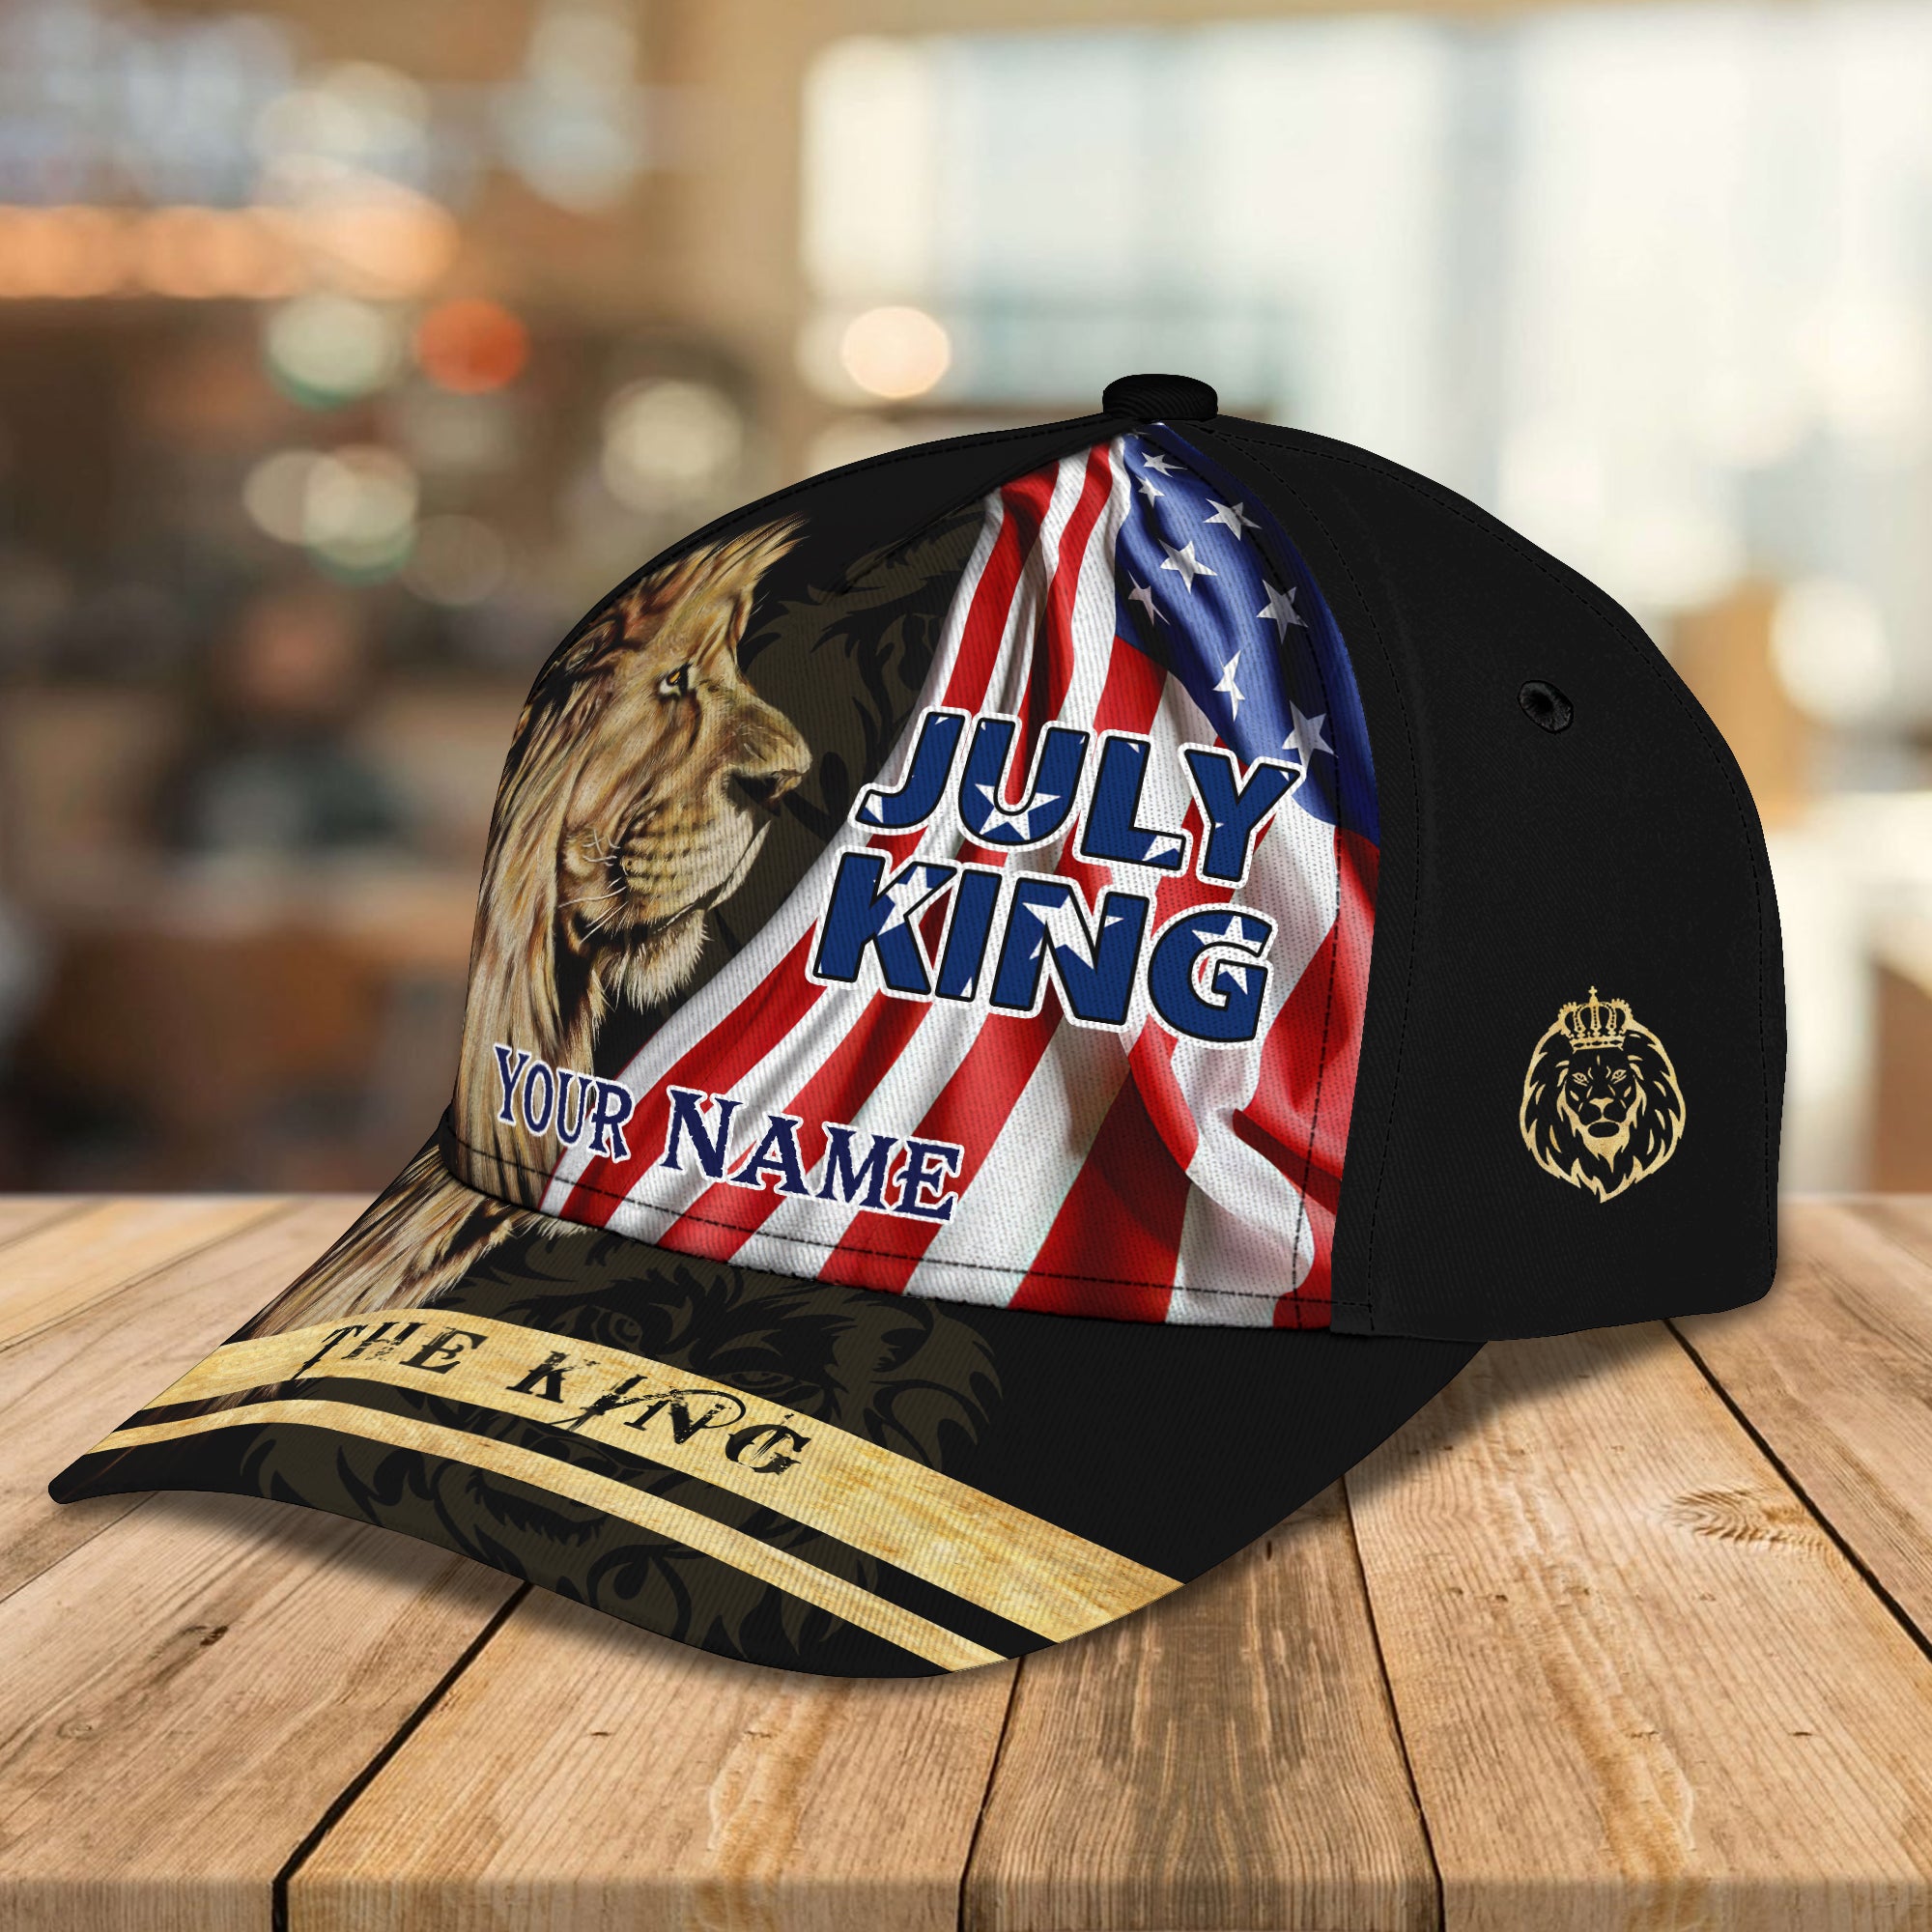 July King - Personalized Name Cap - Nia94